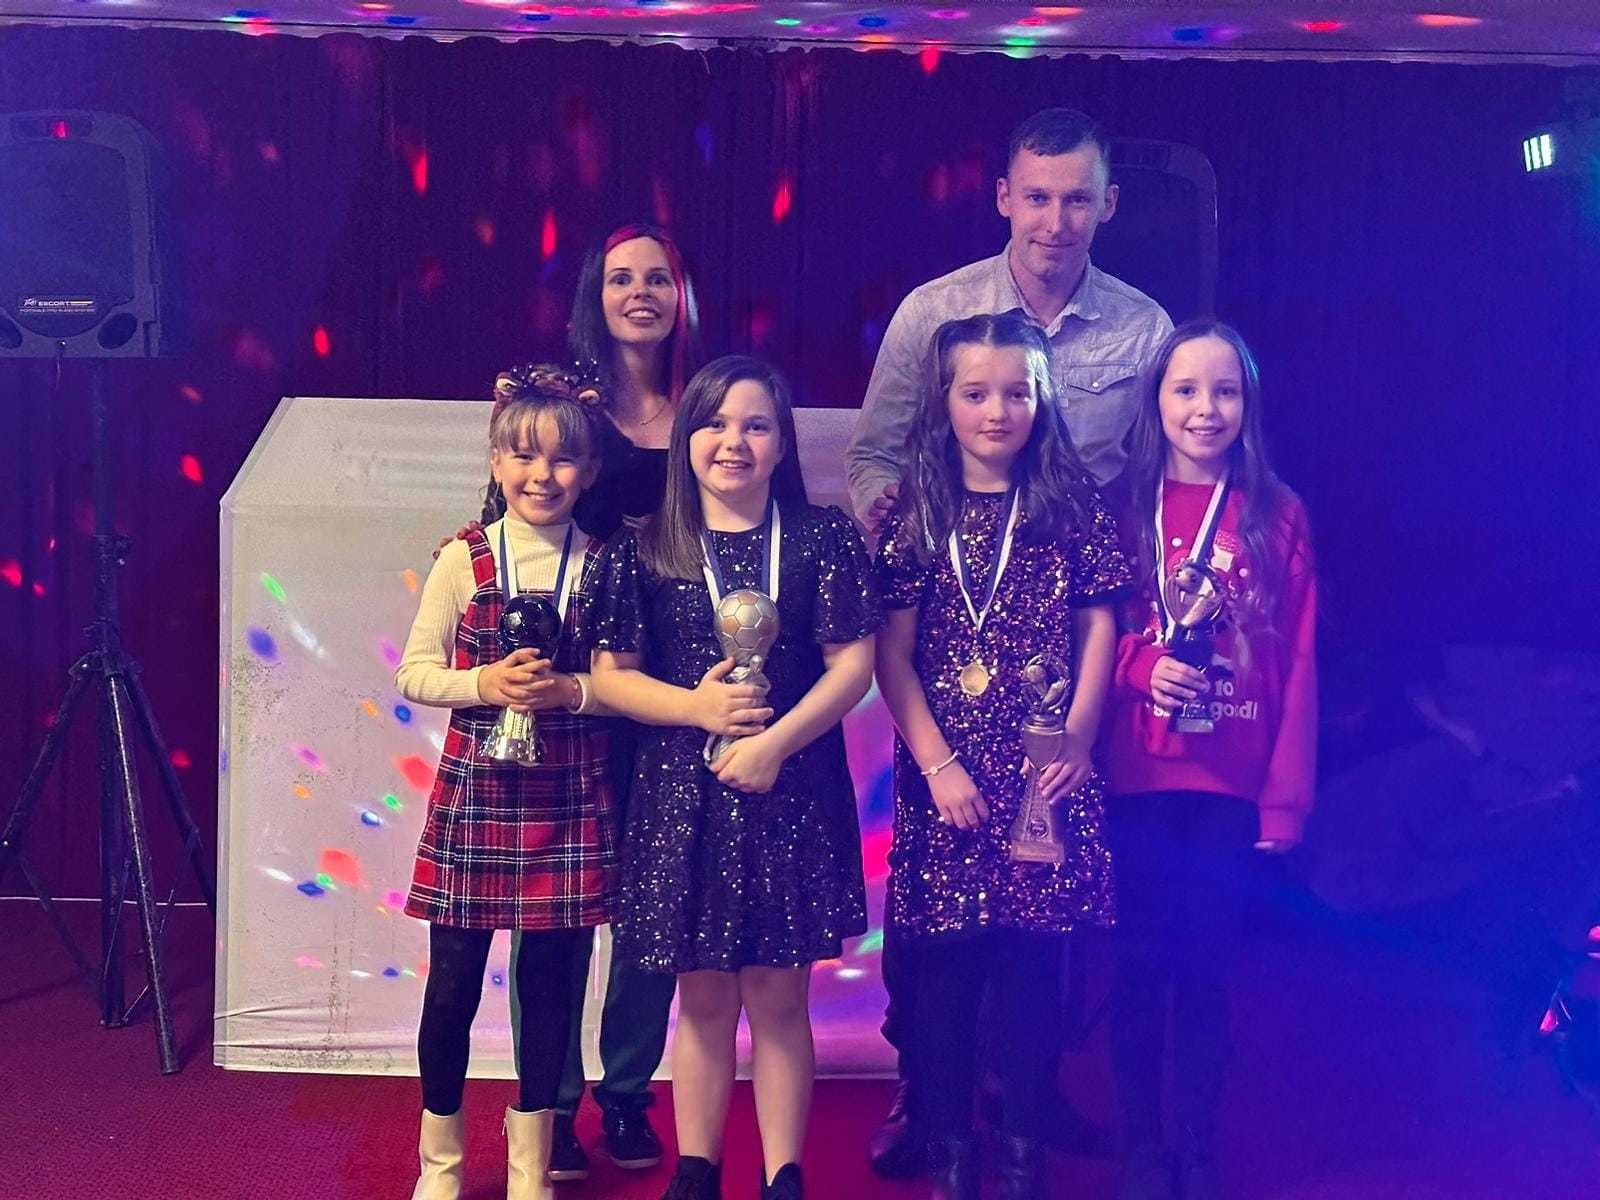 Ross County's under-10 girls award winners for 2023 - Ethos award: Kourtney Docherty. Most improved: Sophie Campbell. Player's player: Jasmine Beeching. Player of the year: Sophie Golabek